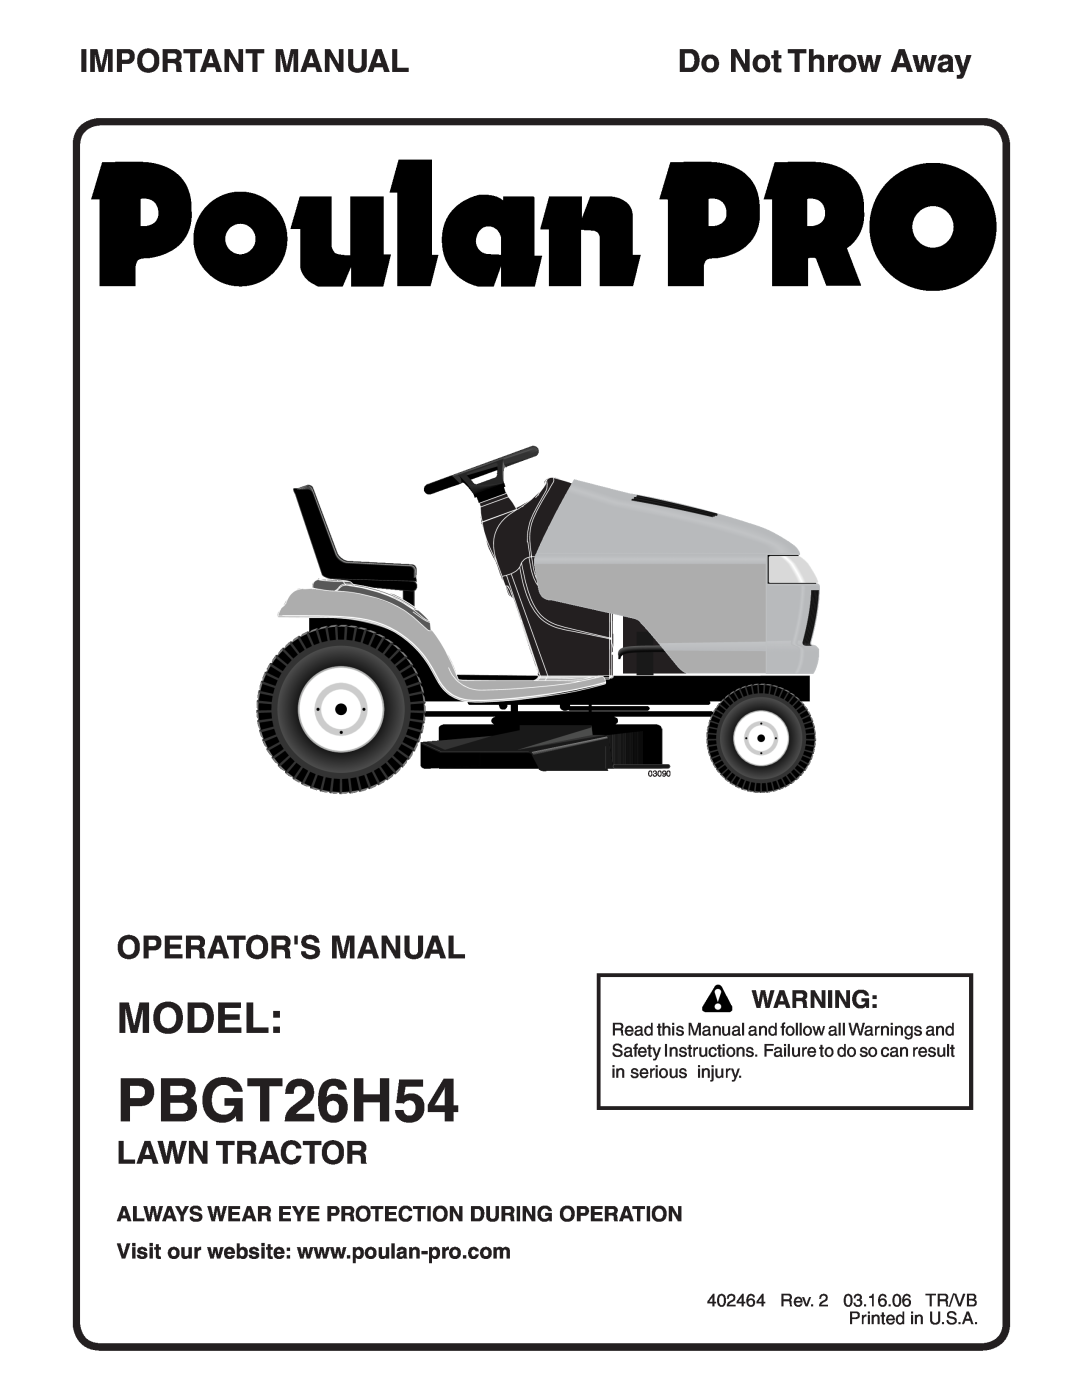 Poulan 402464 manual Model, Important Manual, Operators Manual, Lawn Tractor, Always Wear Eye Protection During Operation 